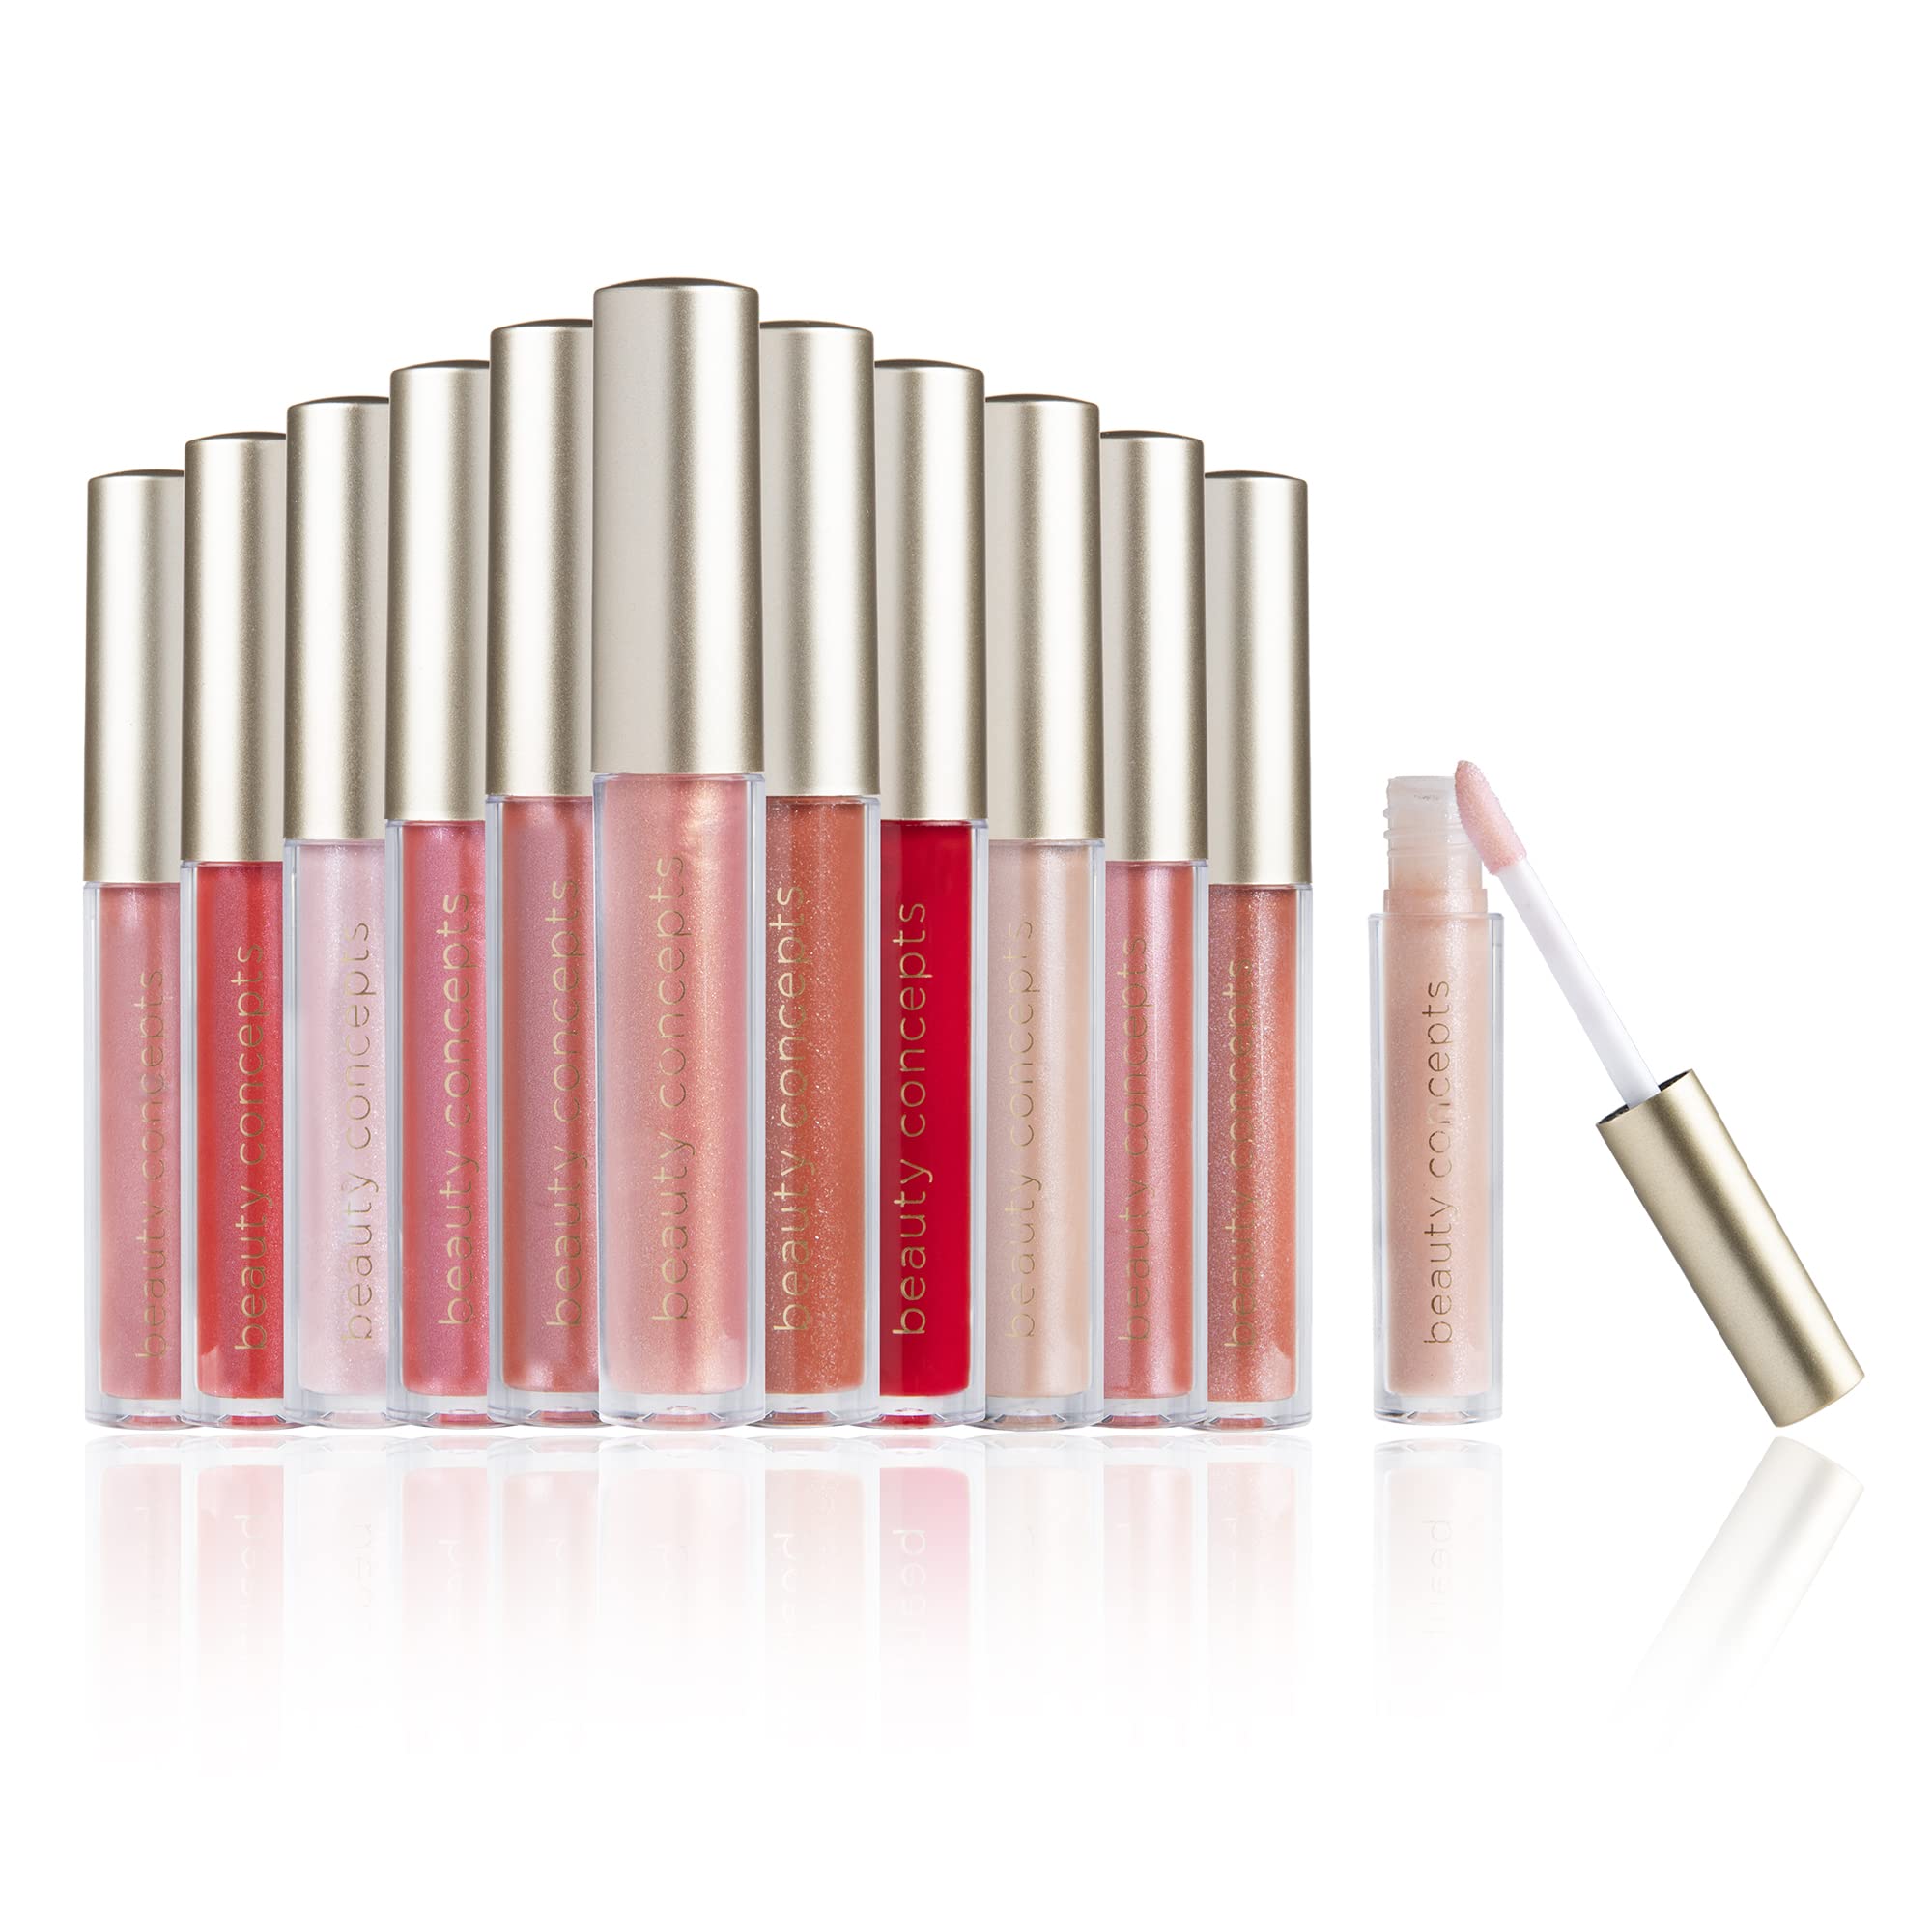 Beauty Concepts Lip Gloss Collection- 12 Piece Lip Gloss Set in Pink and  Red Colors - Comes in Gift Box Lip Gloss Collection (12 Pieces)